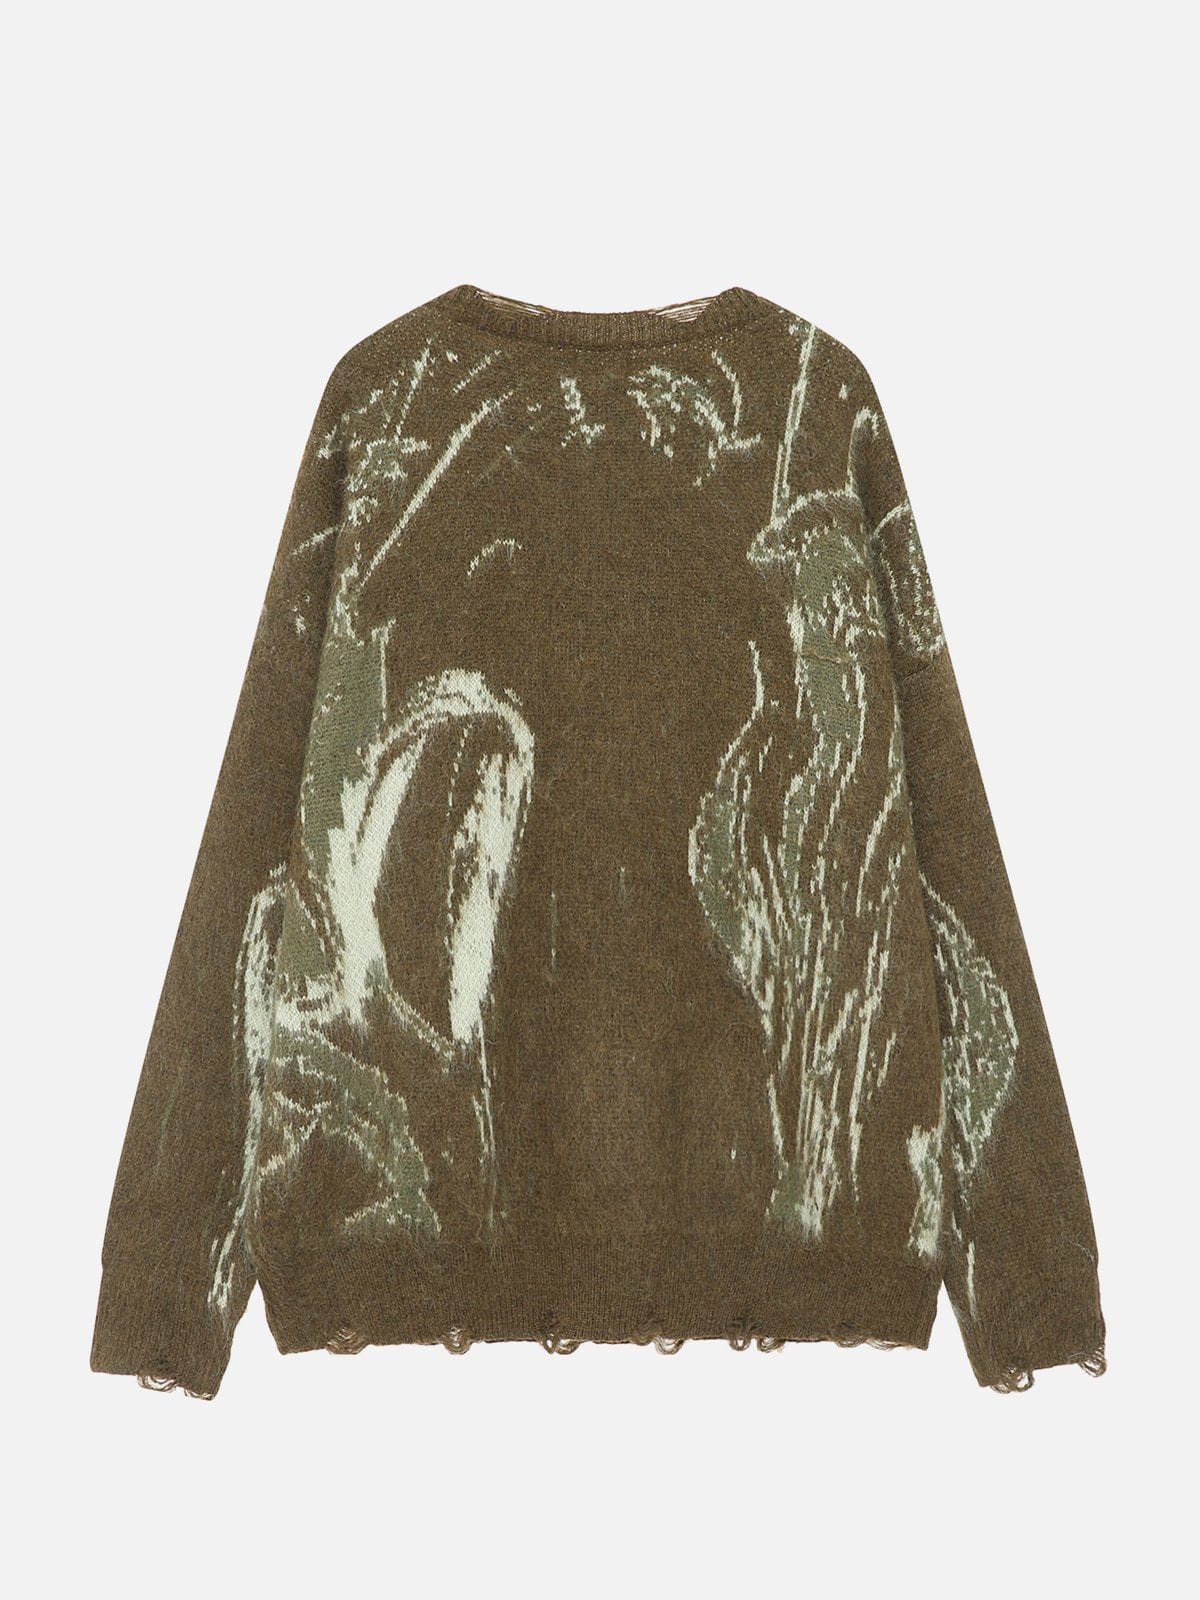 NEV Distressed Abstract Design Sweater